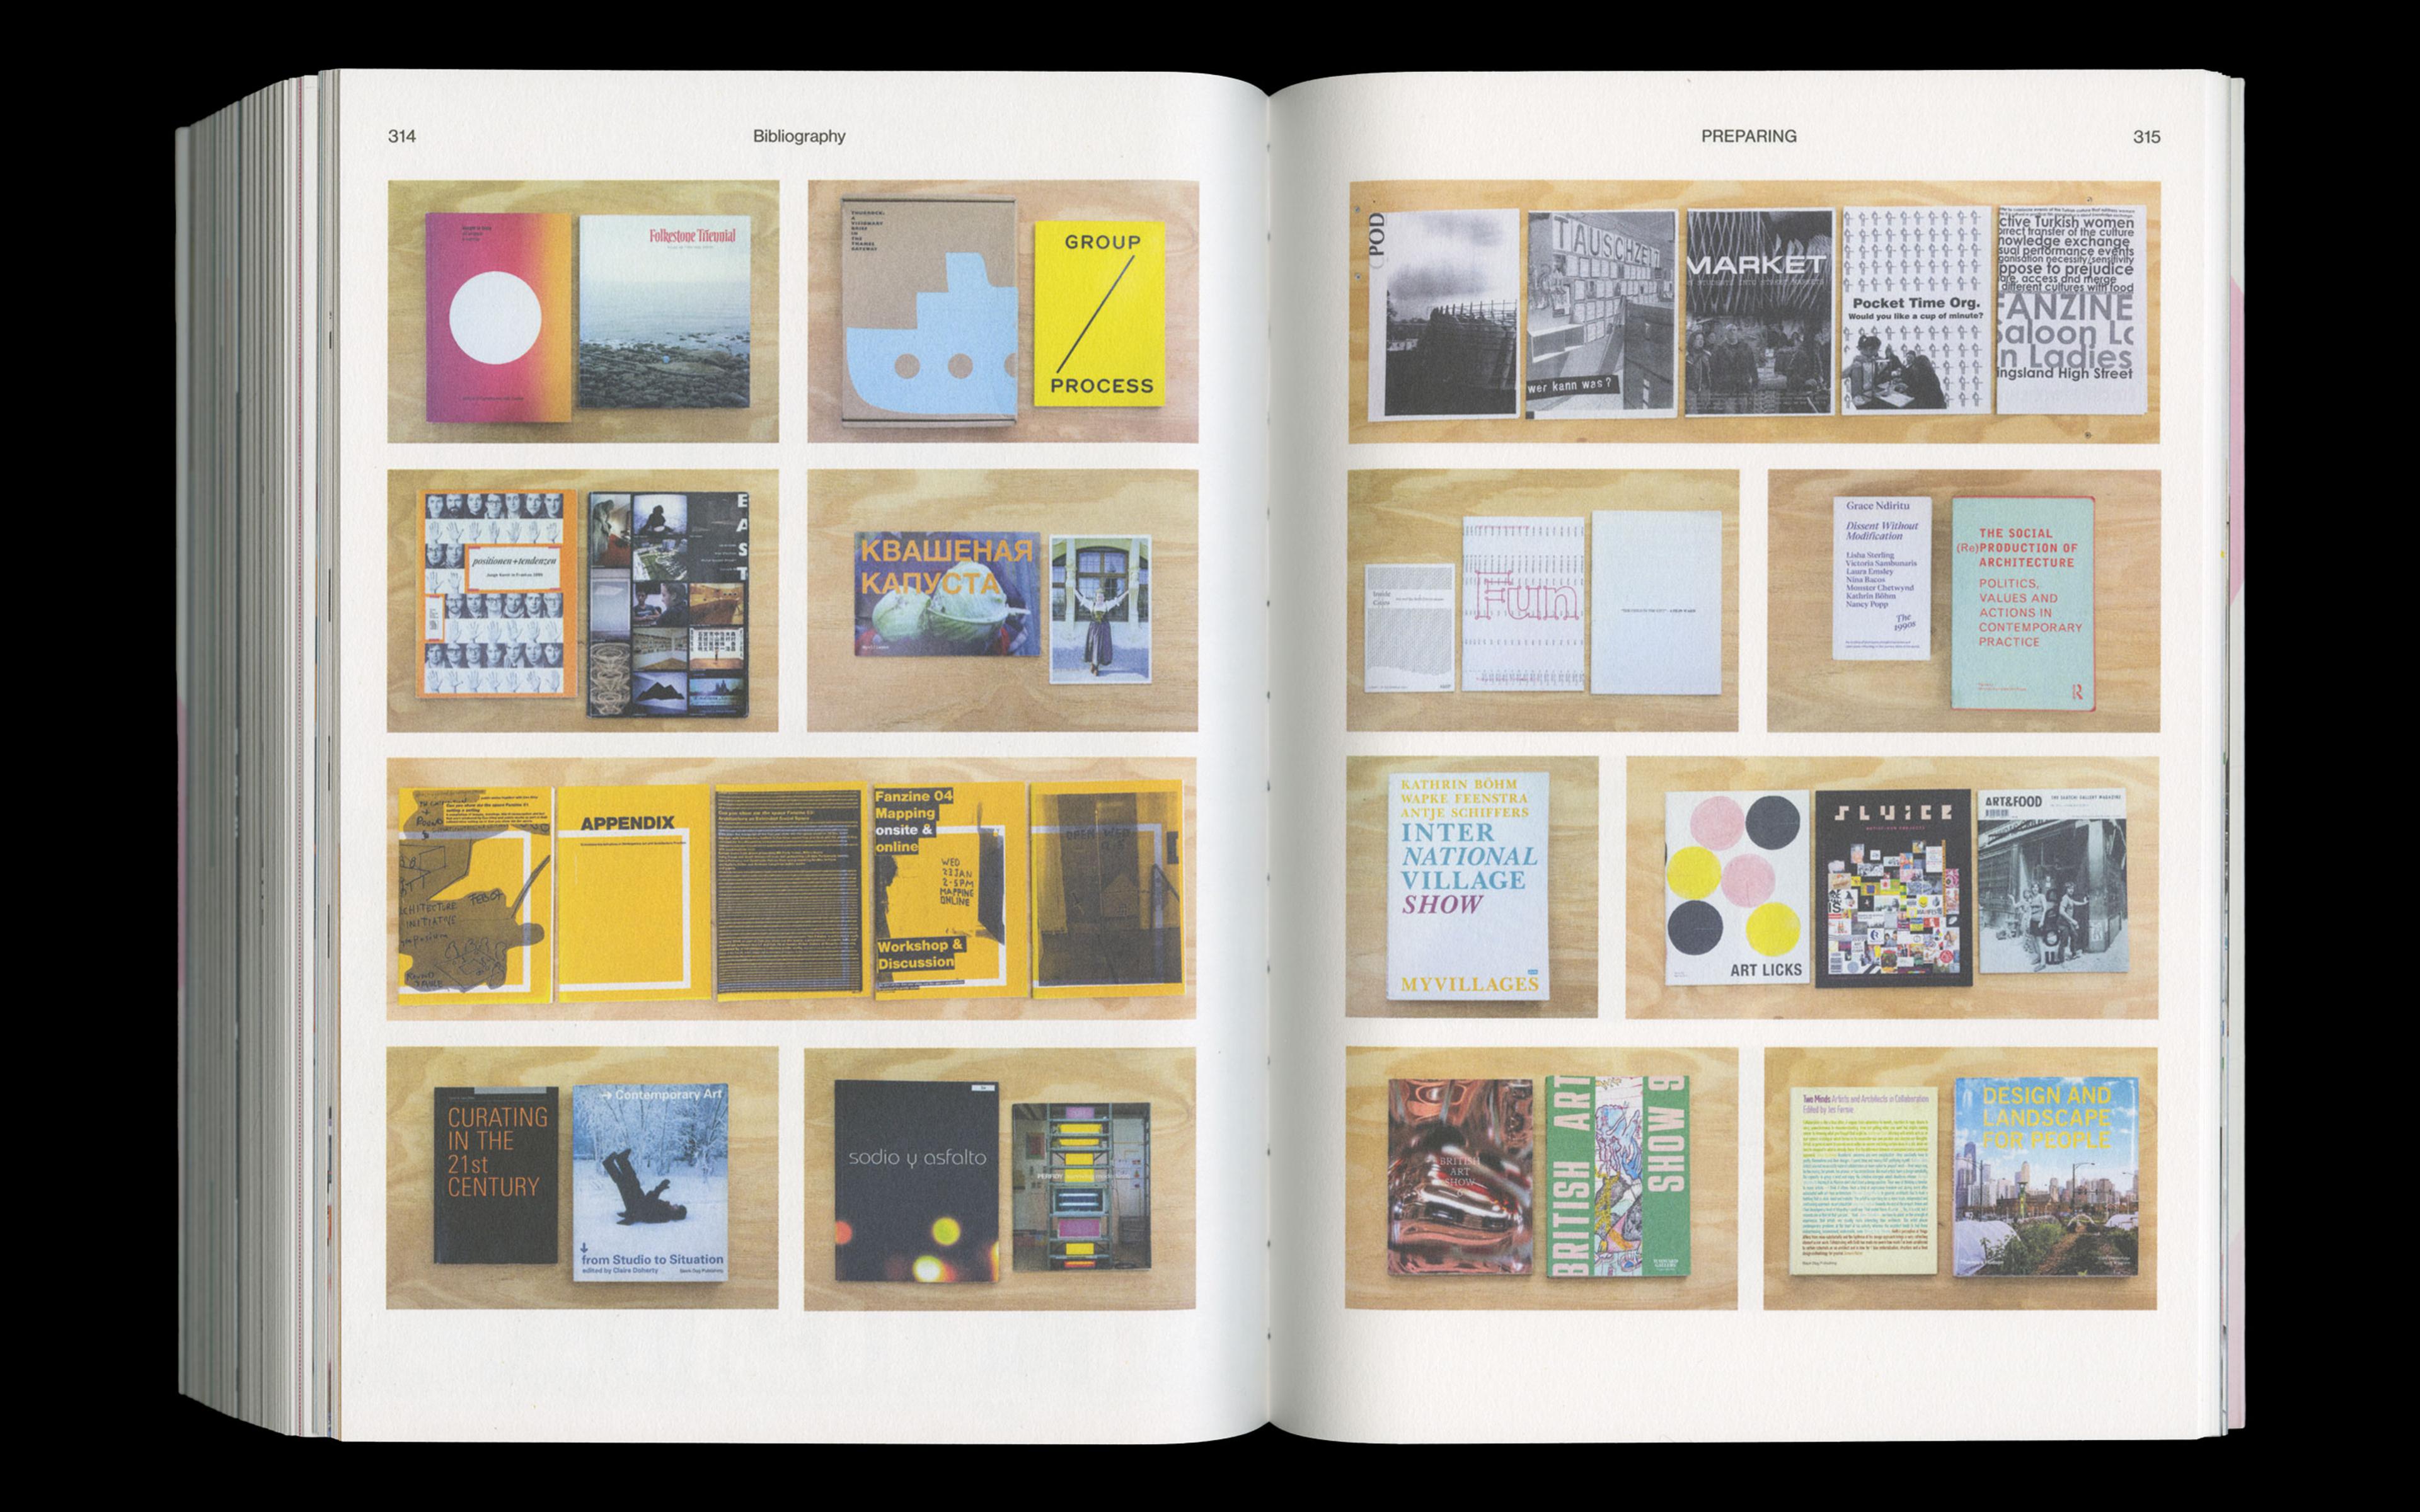 Scan of internal spread of Art on the Scale of Life by Kathrin Böhm showing treatment of bibliography